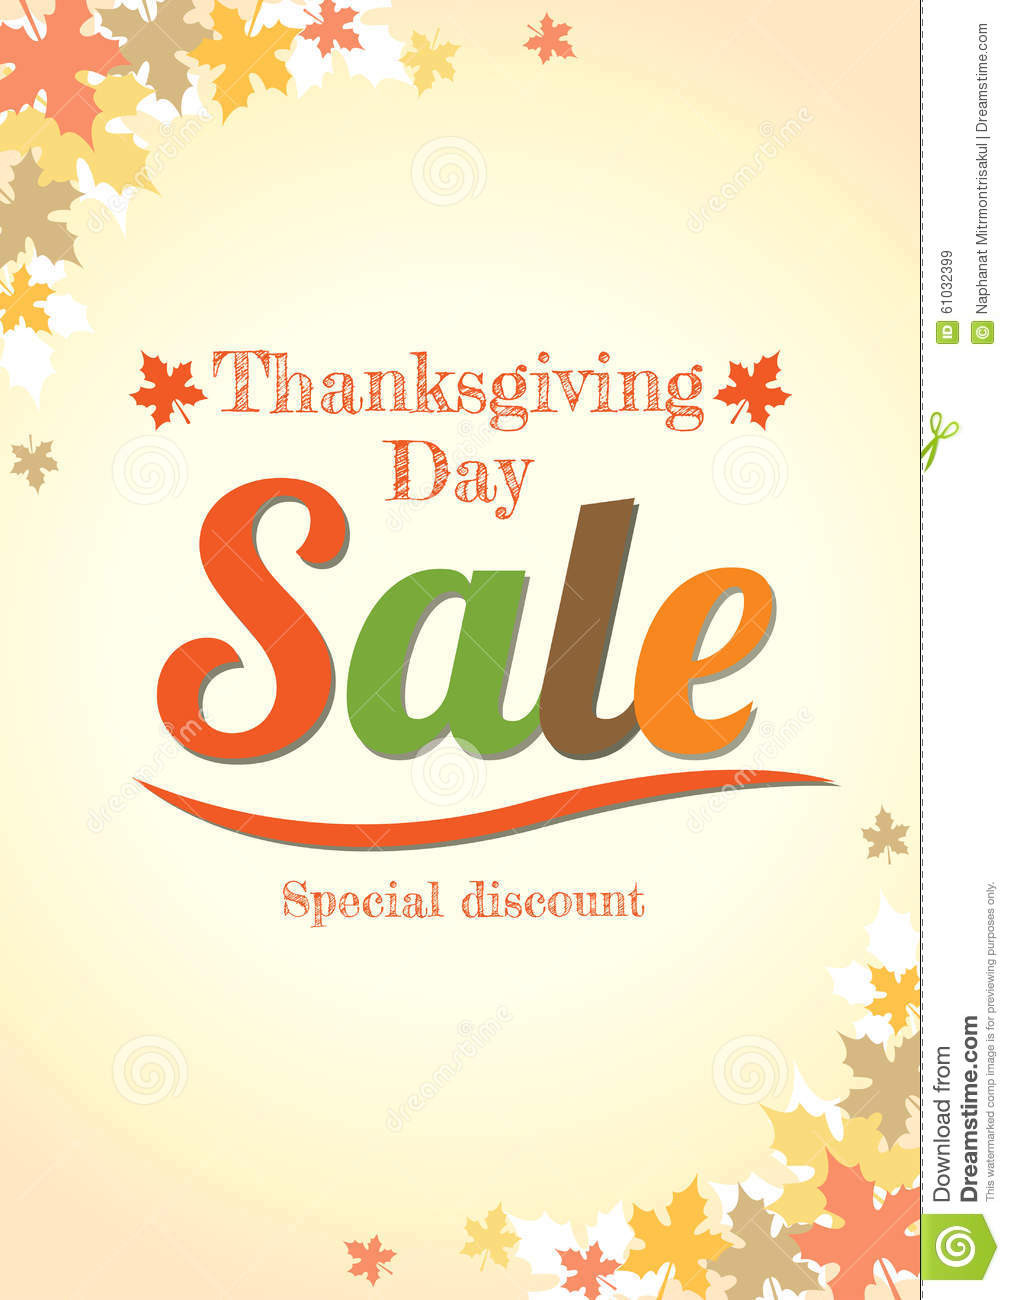 Turkey Sale For Thanksgiving
 Thanksgiving Day Sale Poster In Vector Stock Vector